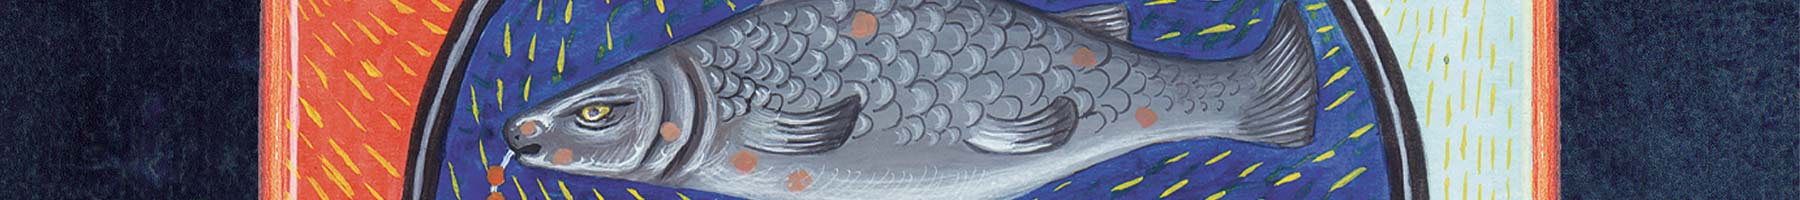 Symbolic artwork of two fish by Sankha Banerjee, from the graphic novel By Water